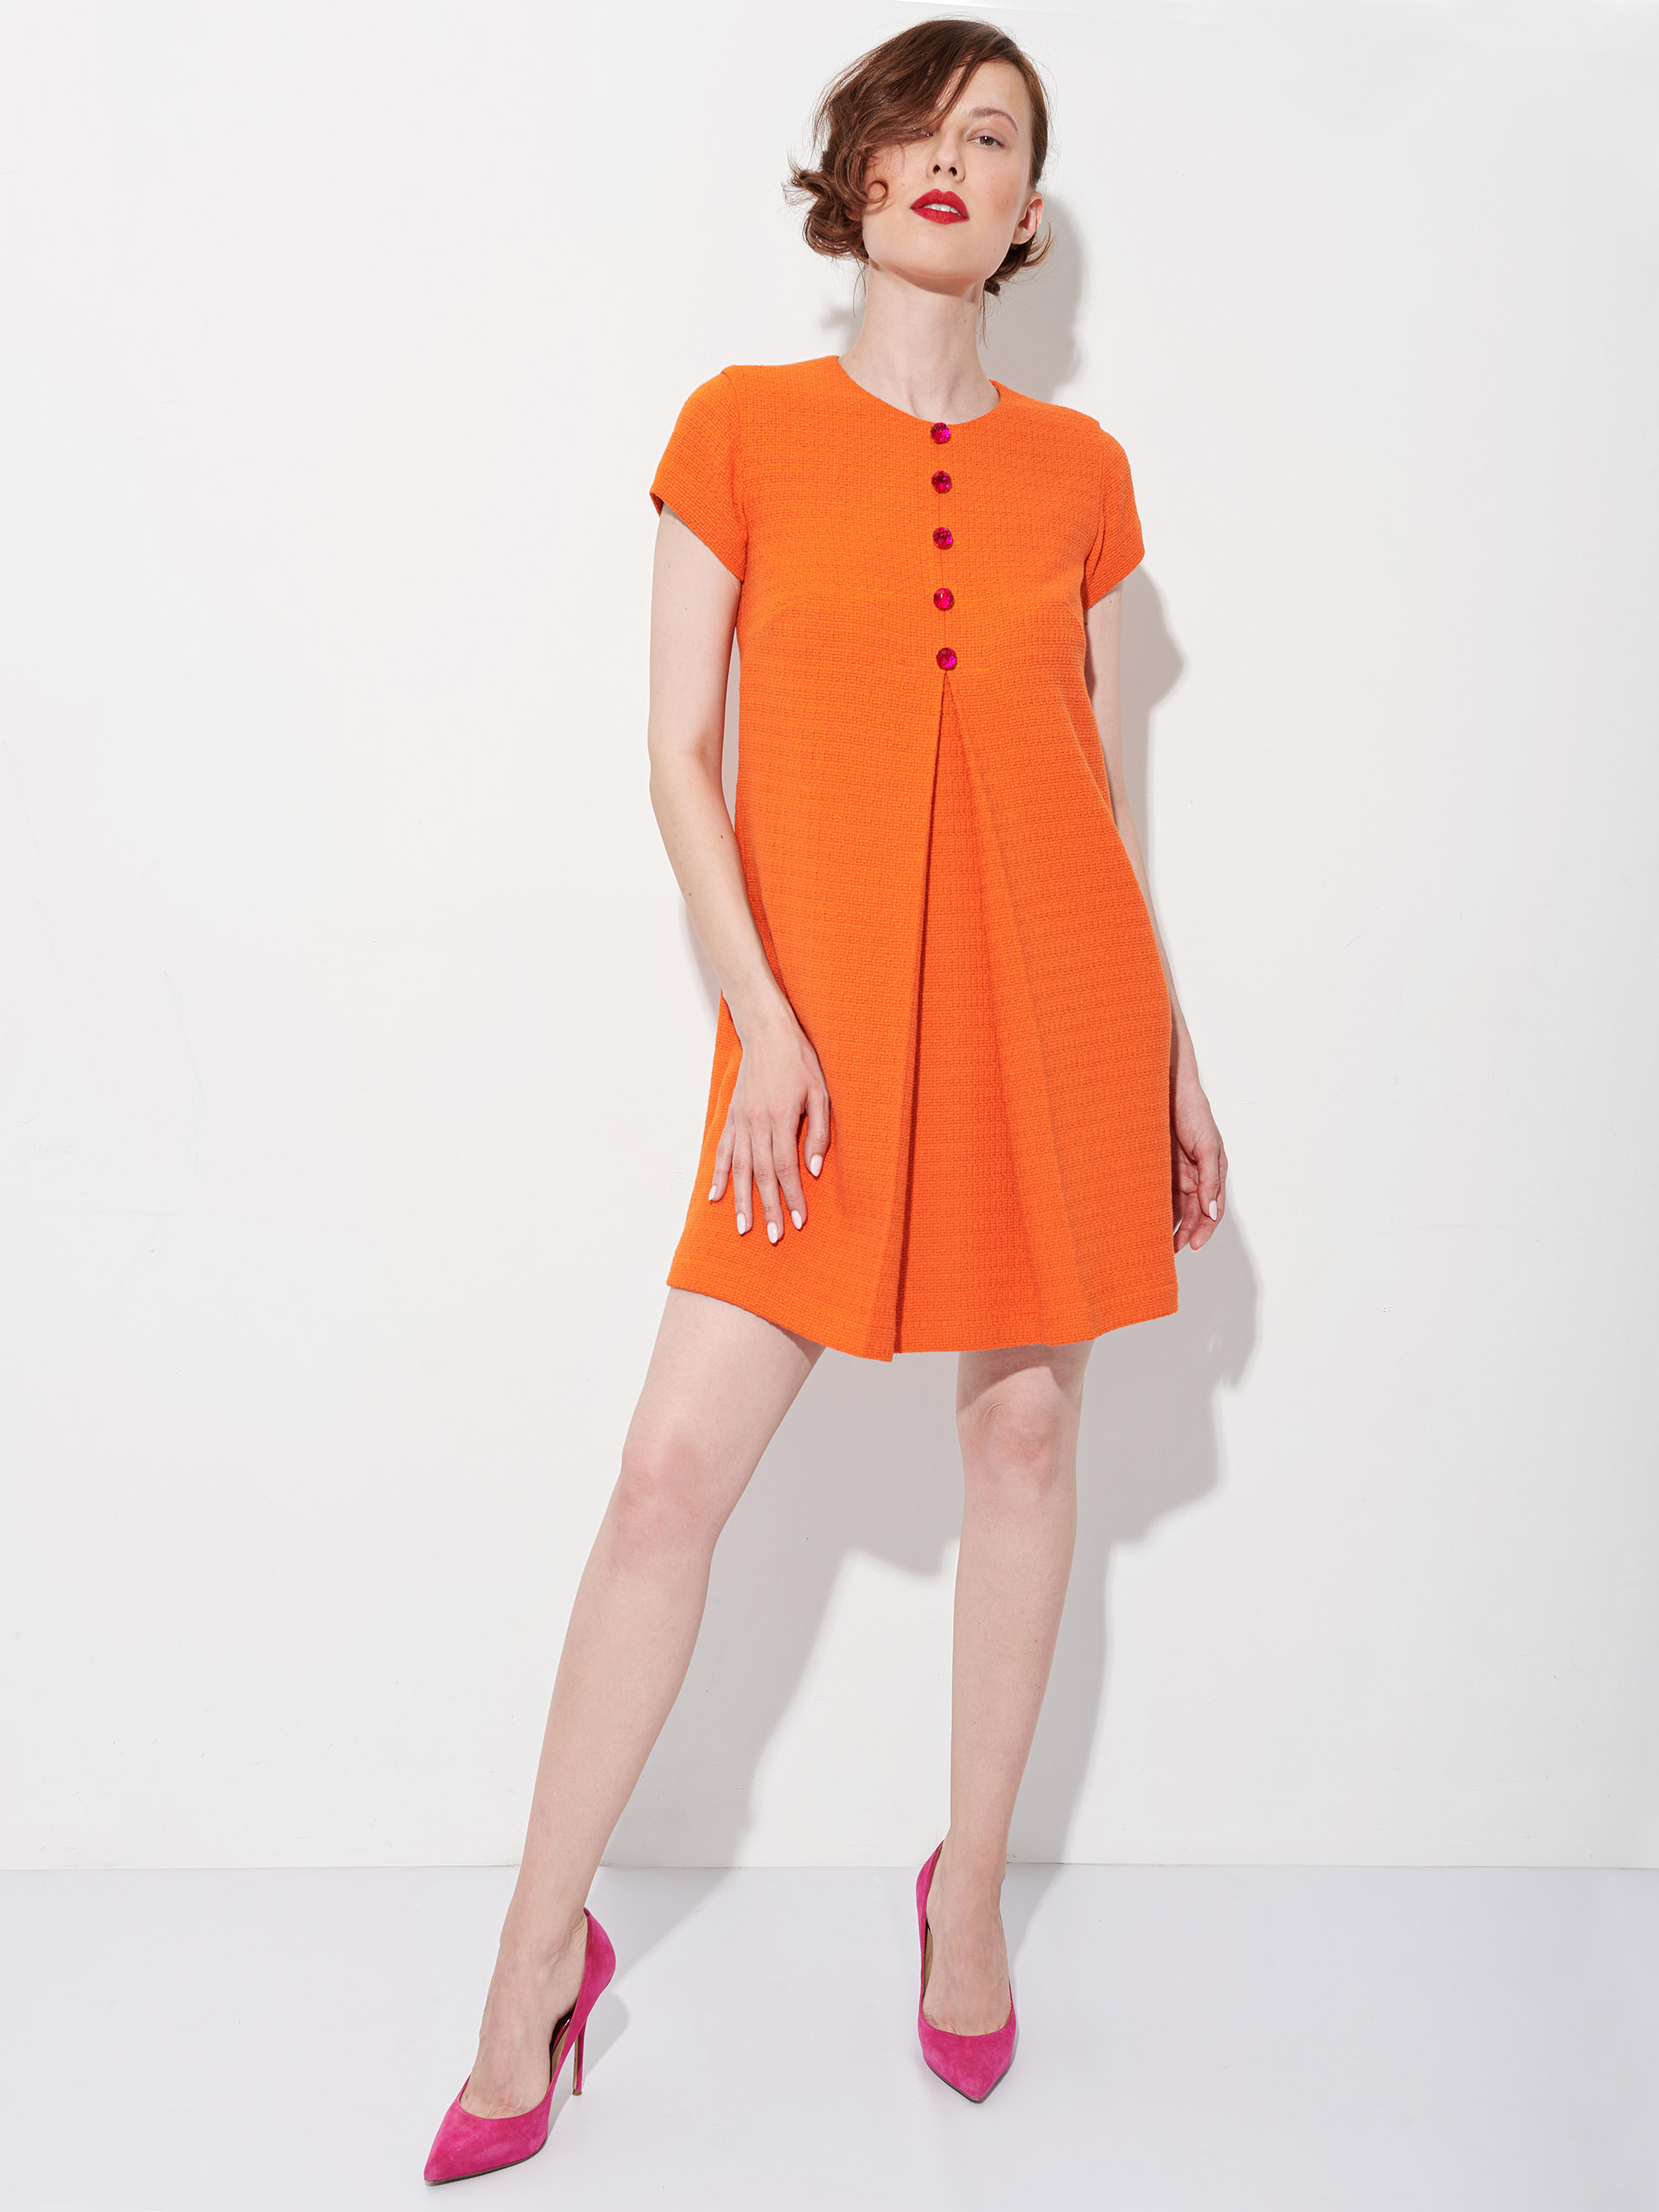 baby doll orange dress with buttons front • Sassa Björg